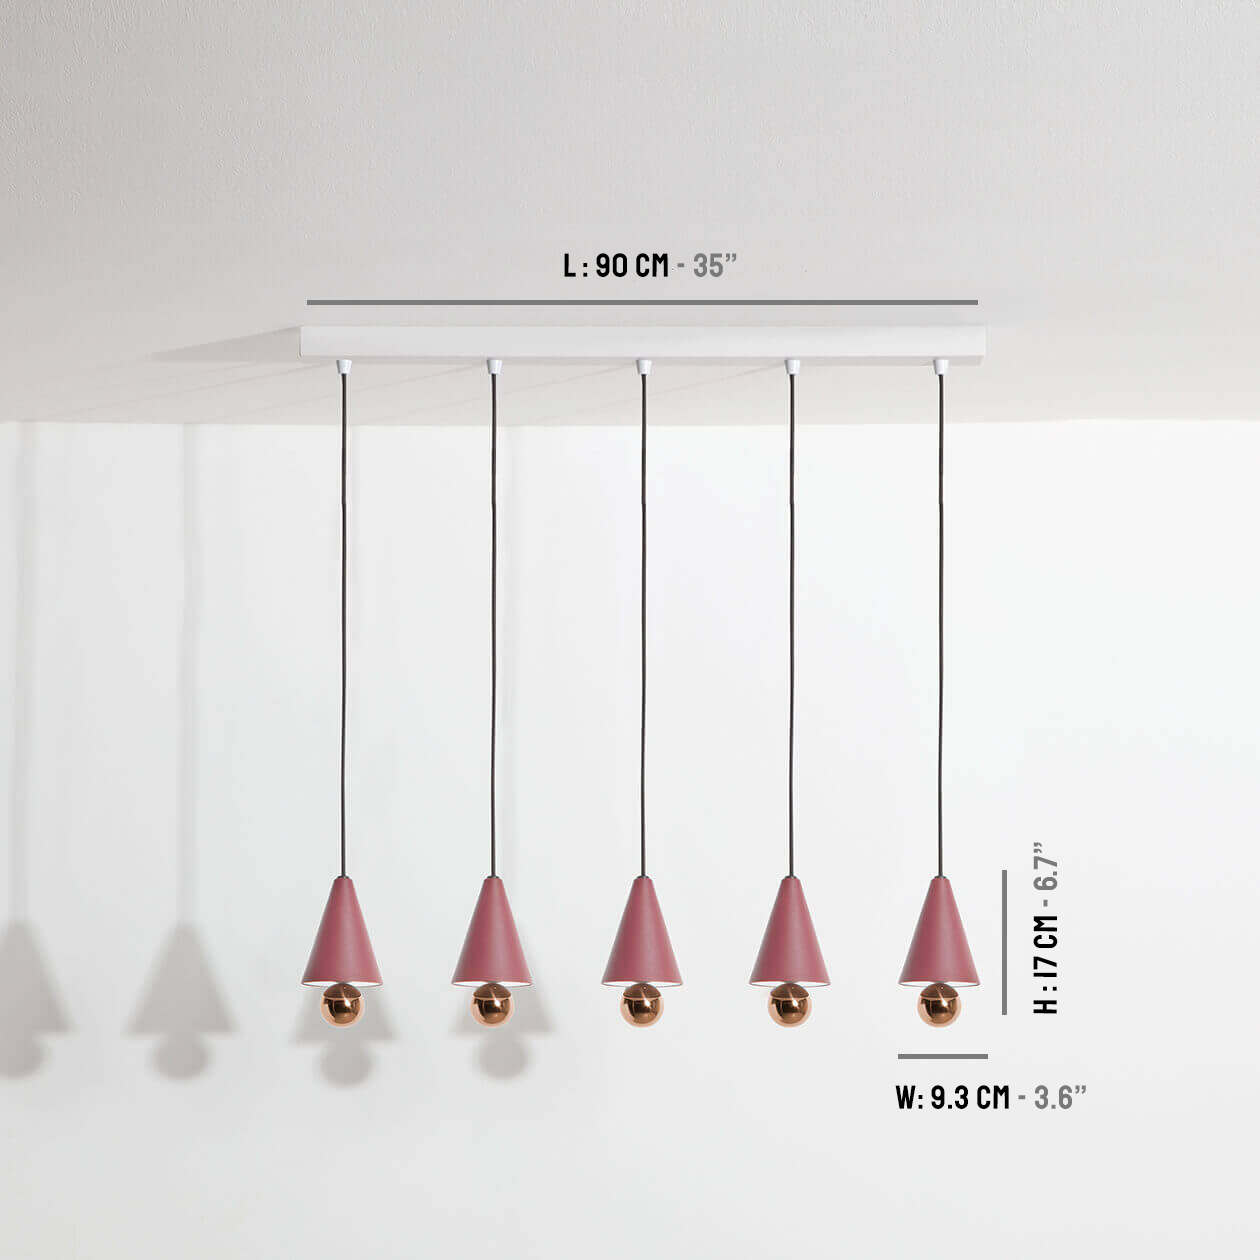 Pendant-system-5-pendants-Cherry-LED-brown-red-Petite-Friture-dimensions